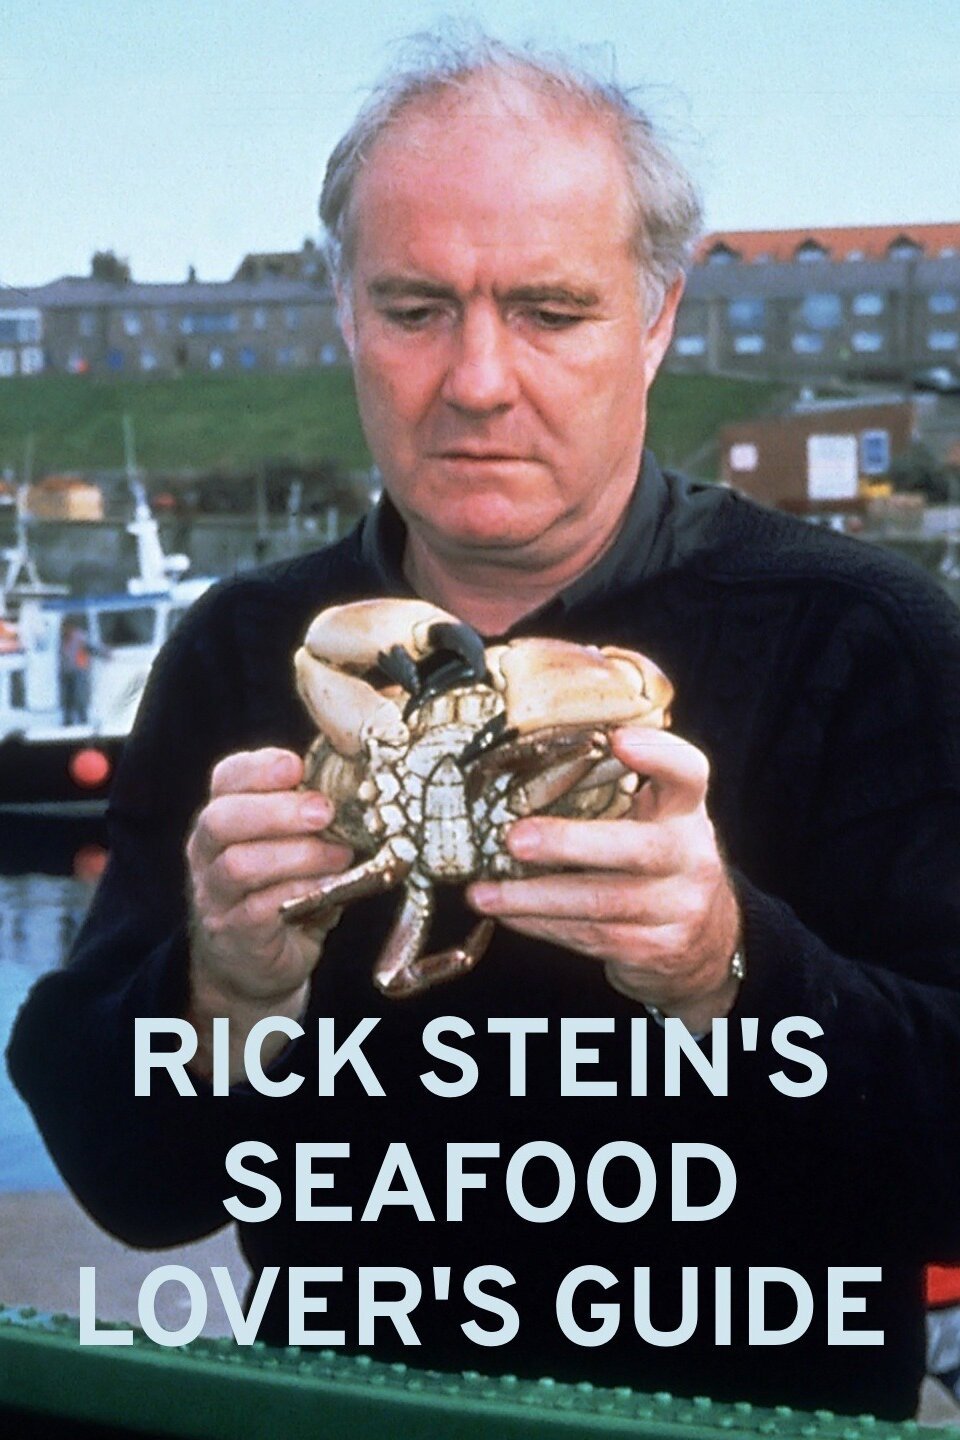 Rick Stein's Seafood Lover's Guide Pictures - Rotten Tomatoes